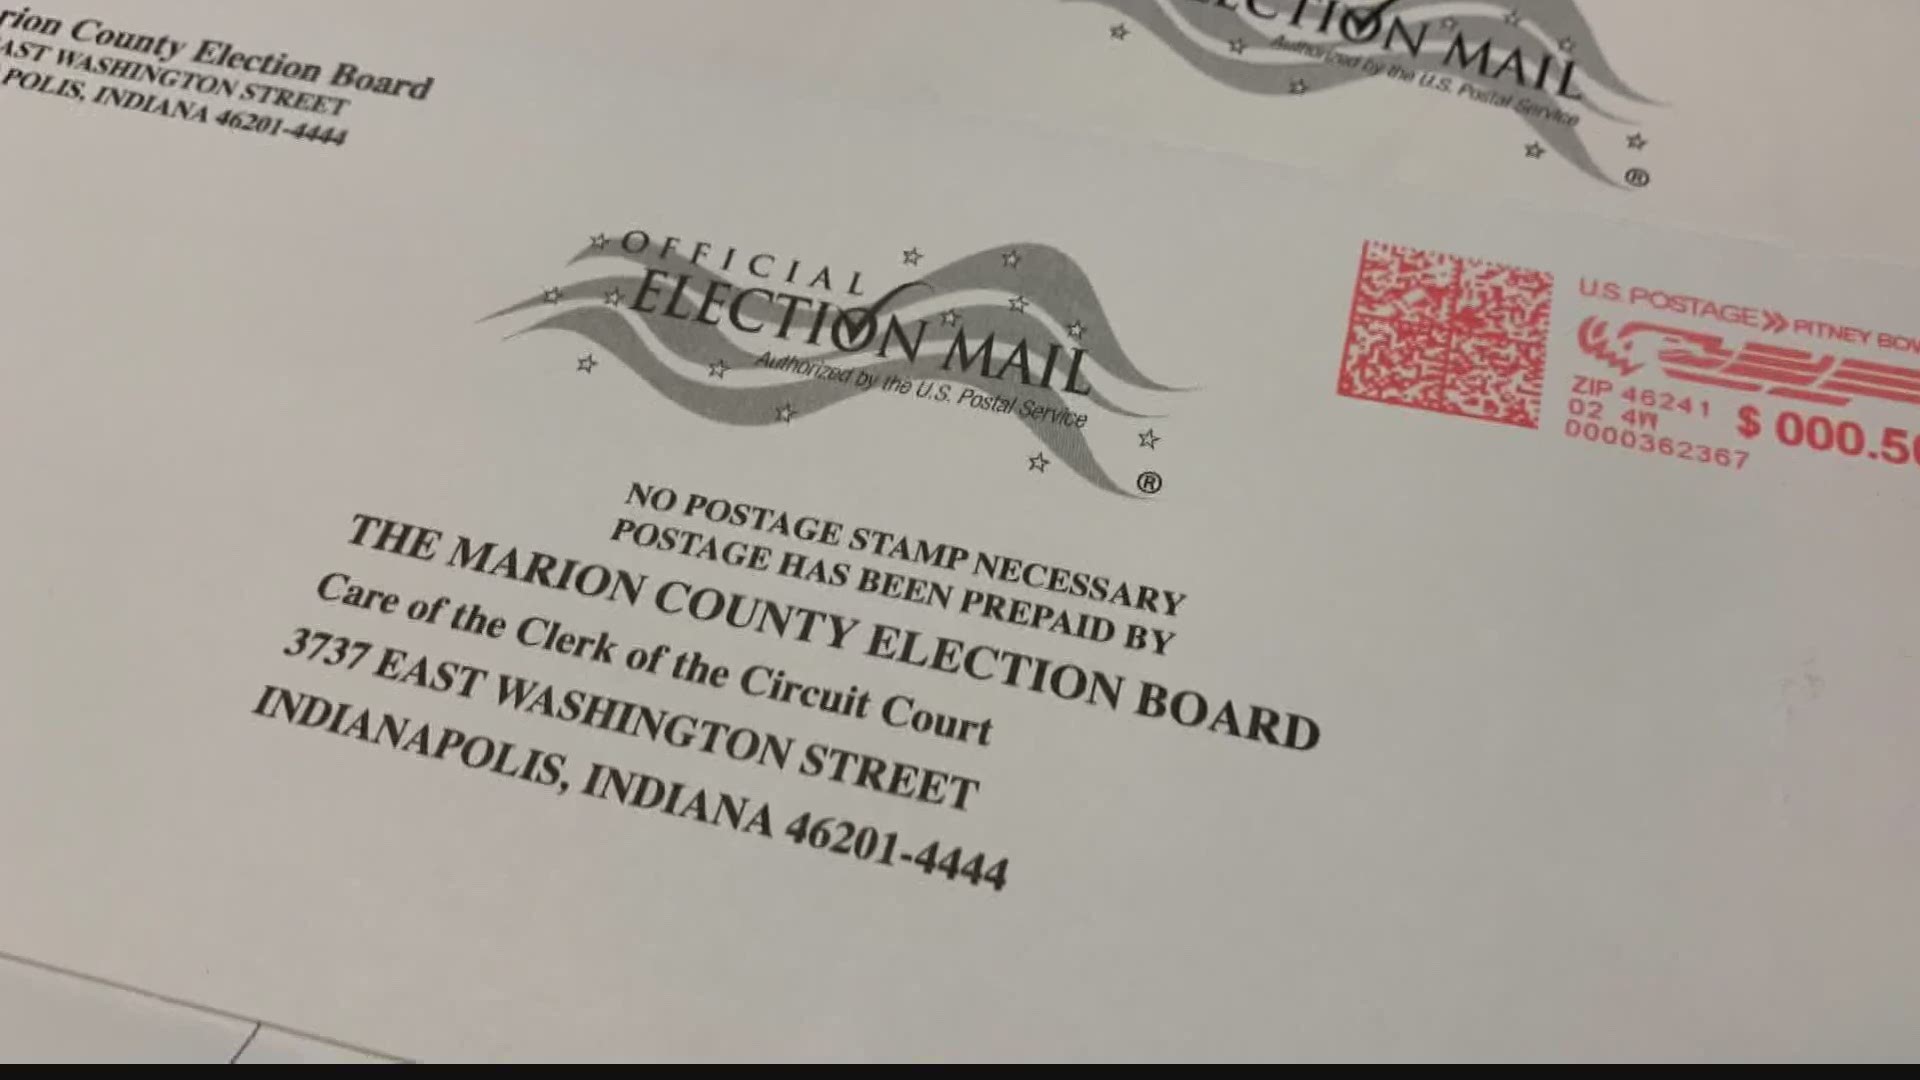 One election official said mail-in voting would increase turnout by 10 percent